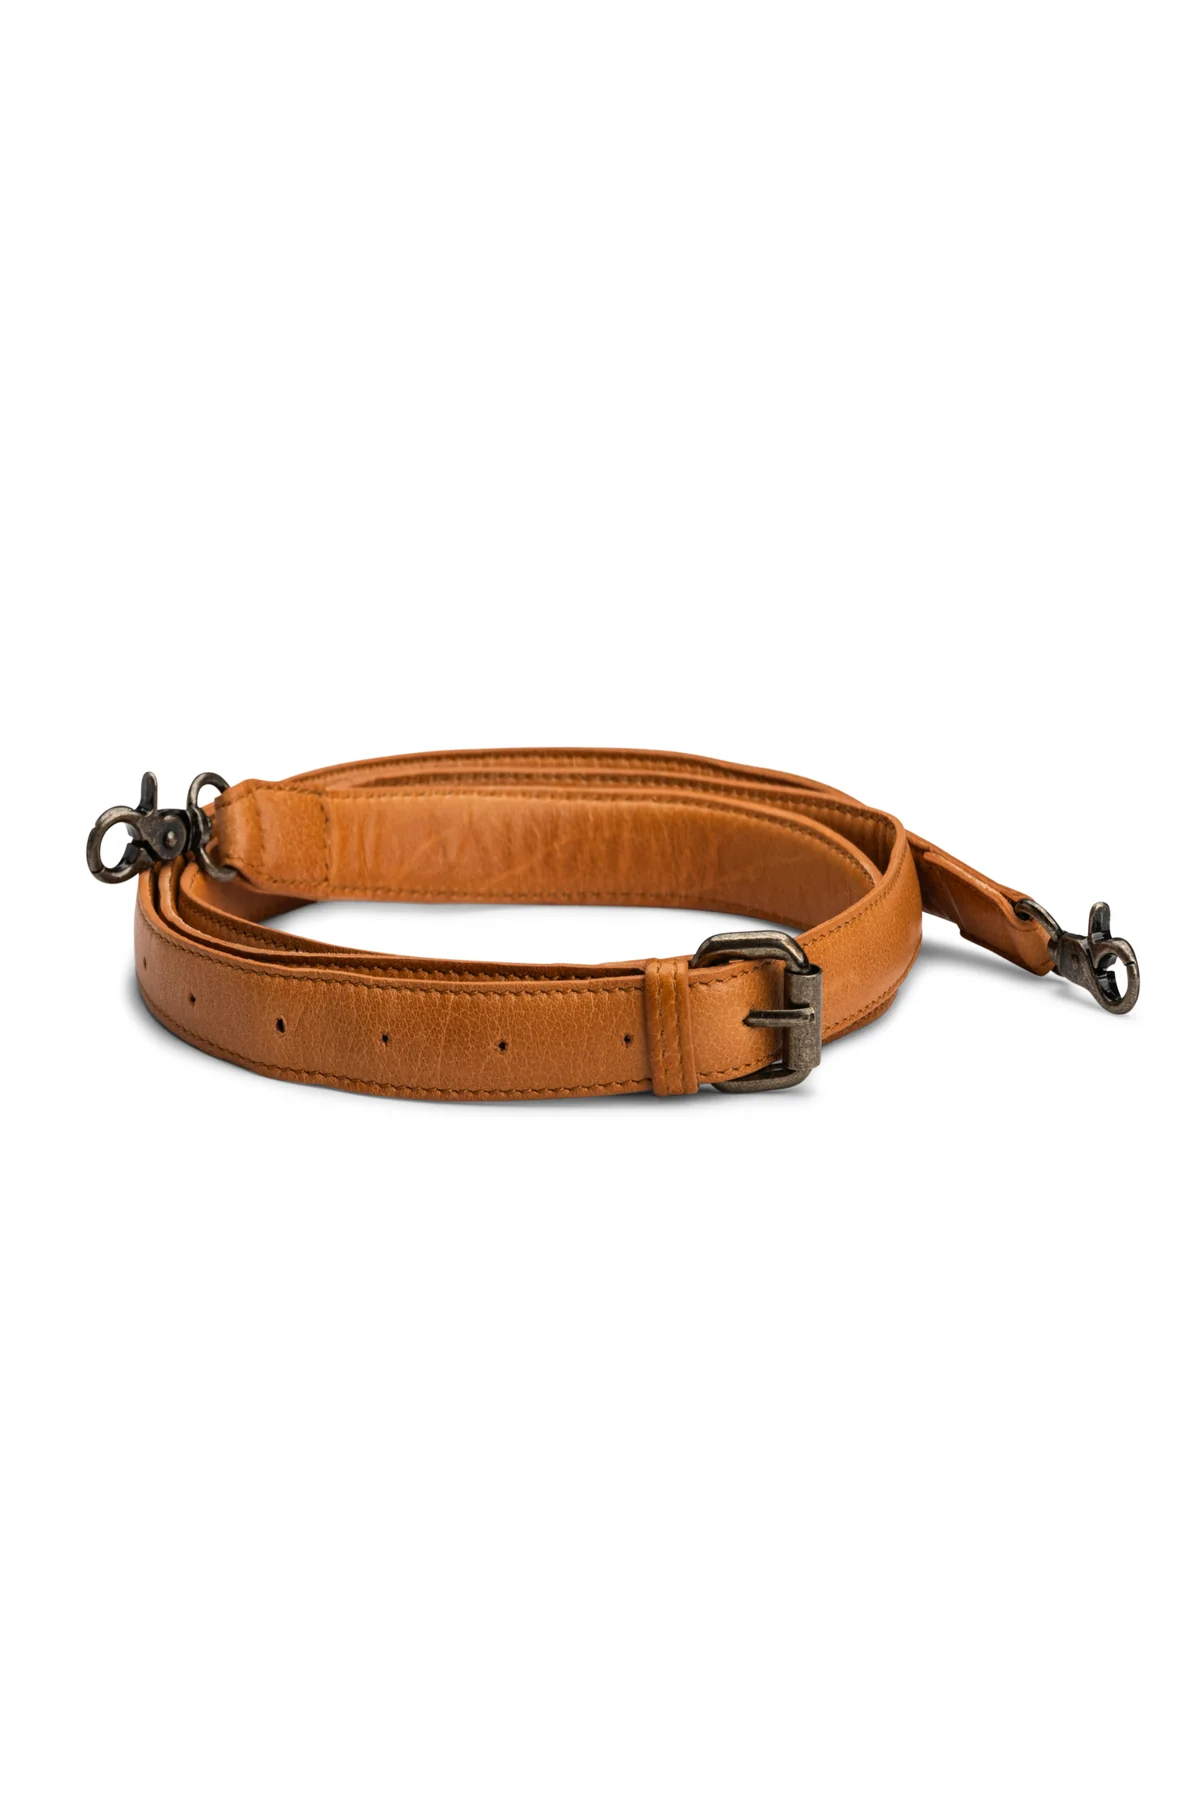 muud_Caia_shoulderstrap_whisky_1